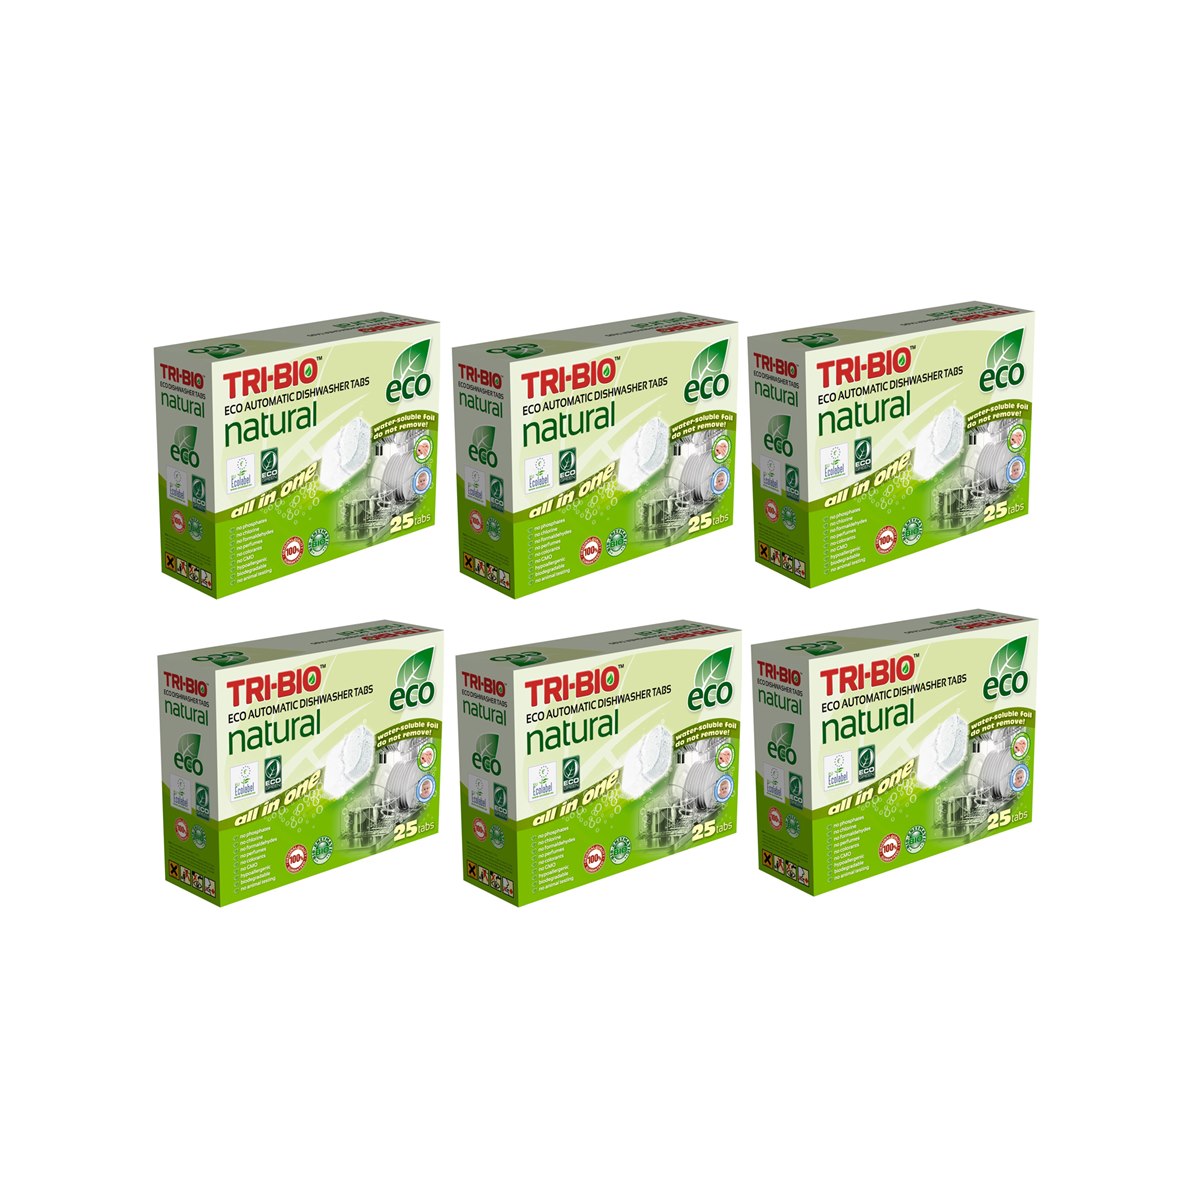 Case of 6 x Tri-Bio Eco All In One Dishwasher Tablets 500g (25 Tablets)